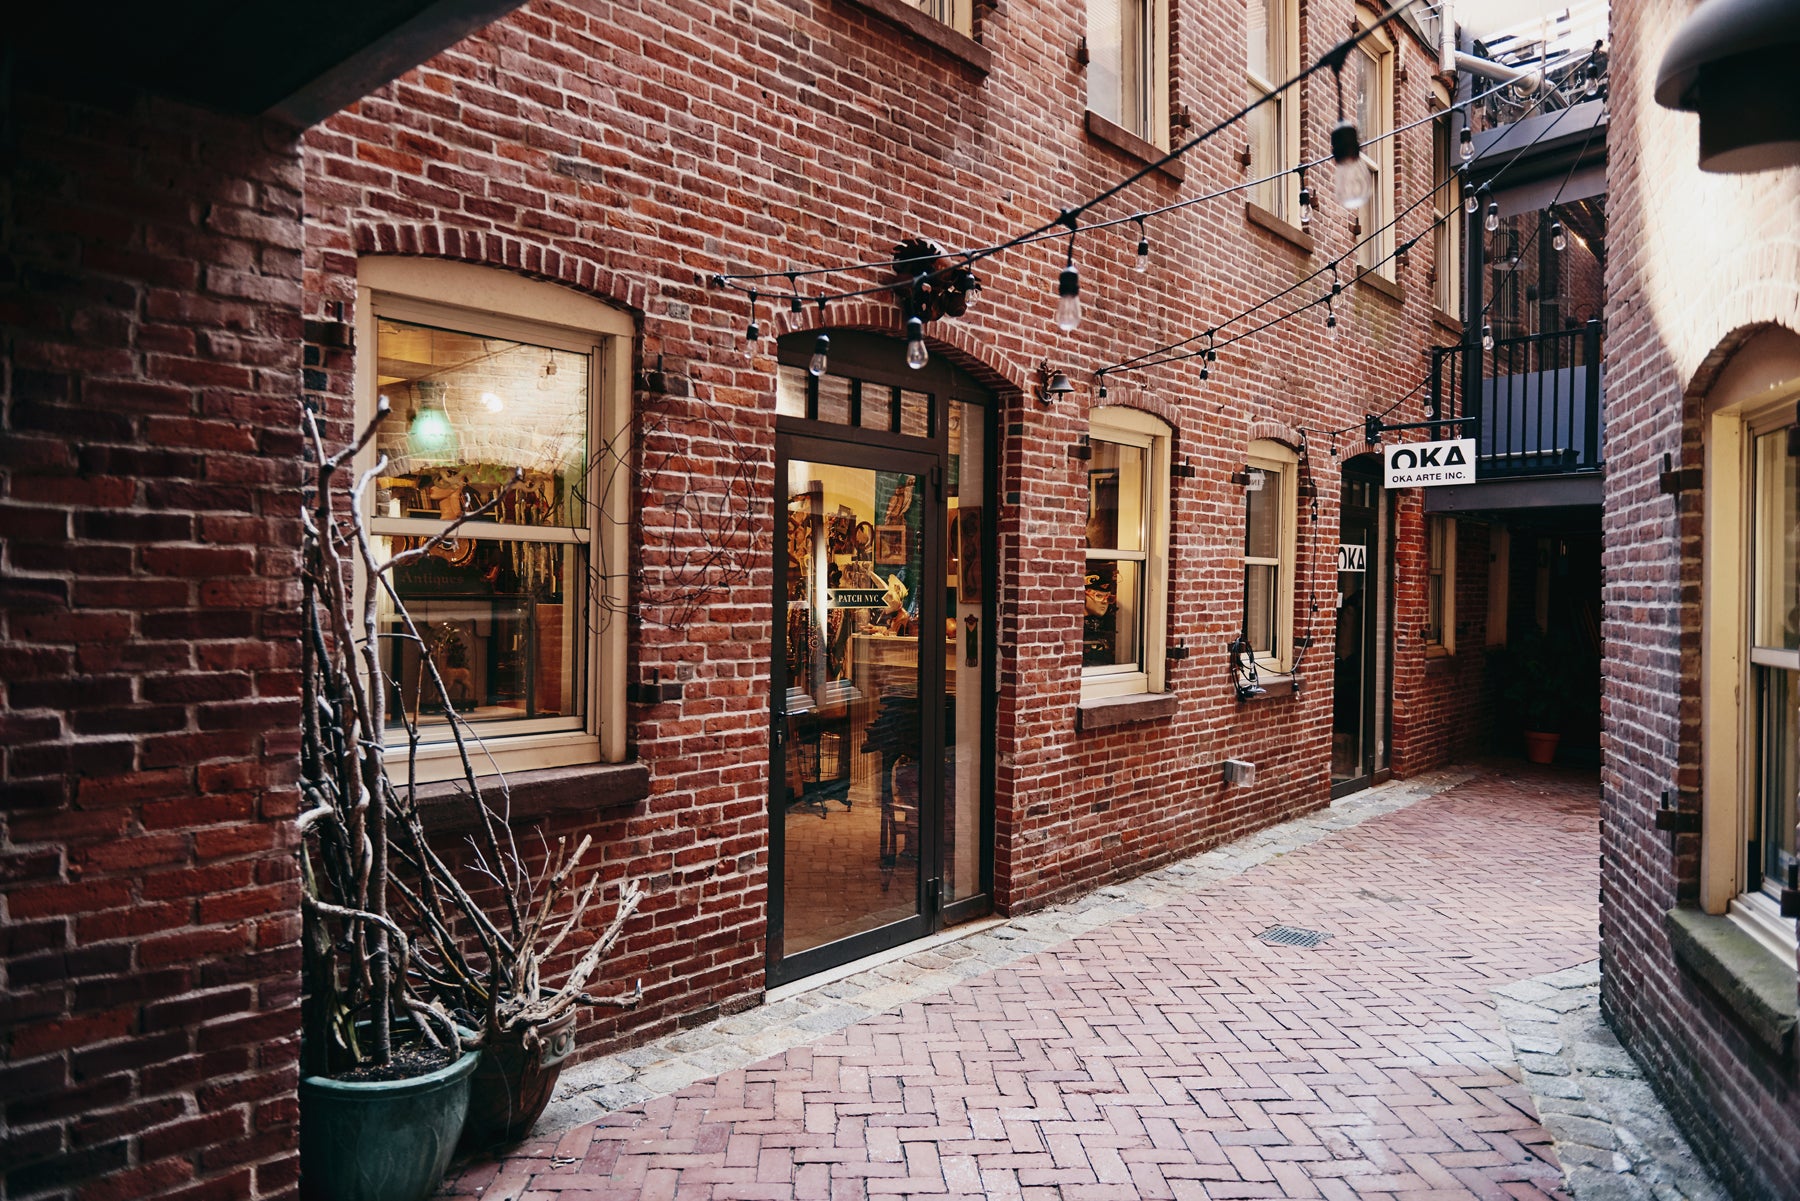 Image of the exterior of a brick retail building in an alley in Boston’s South End neighborhood. Two store signs say, “PATCH NYC” and “OKA ARTE INC.” String lights crisscross the narrow space between buildings.